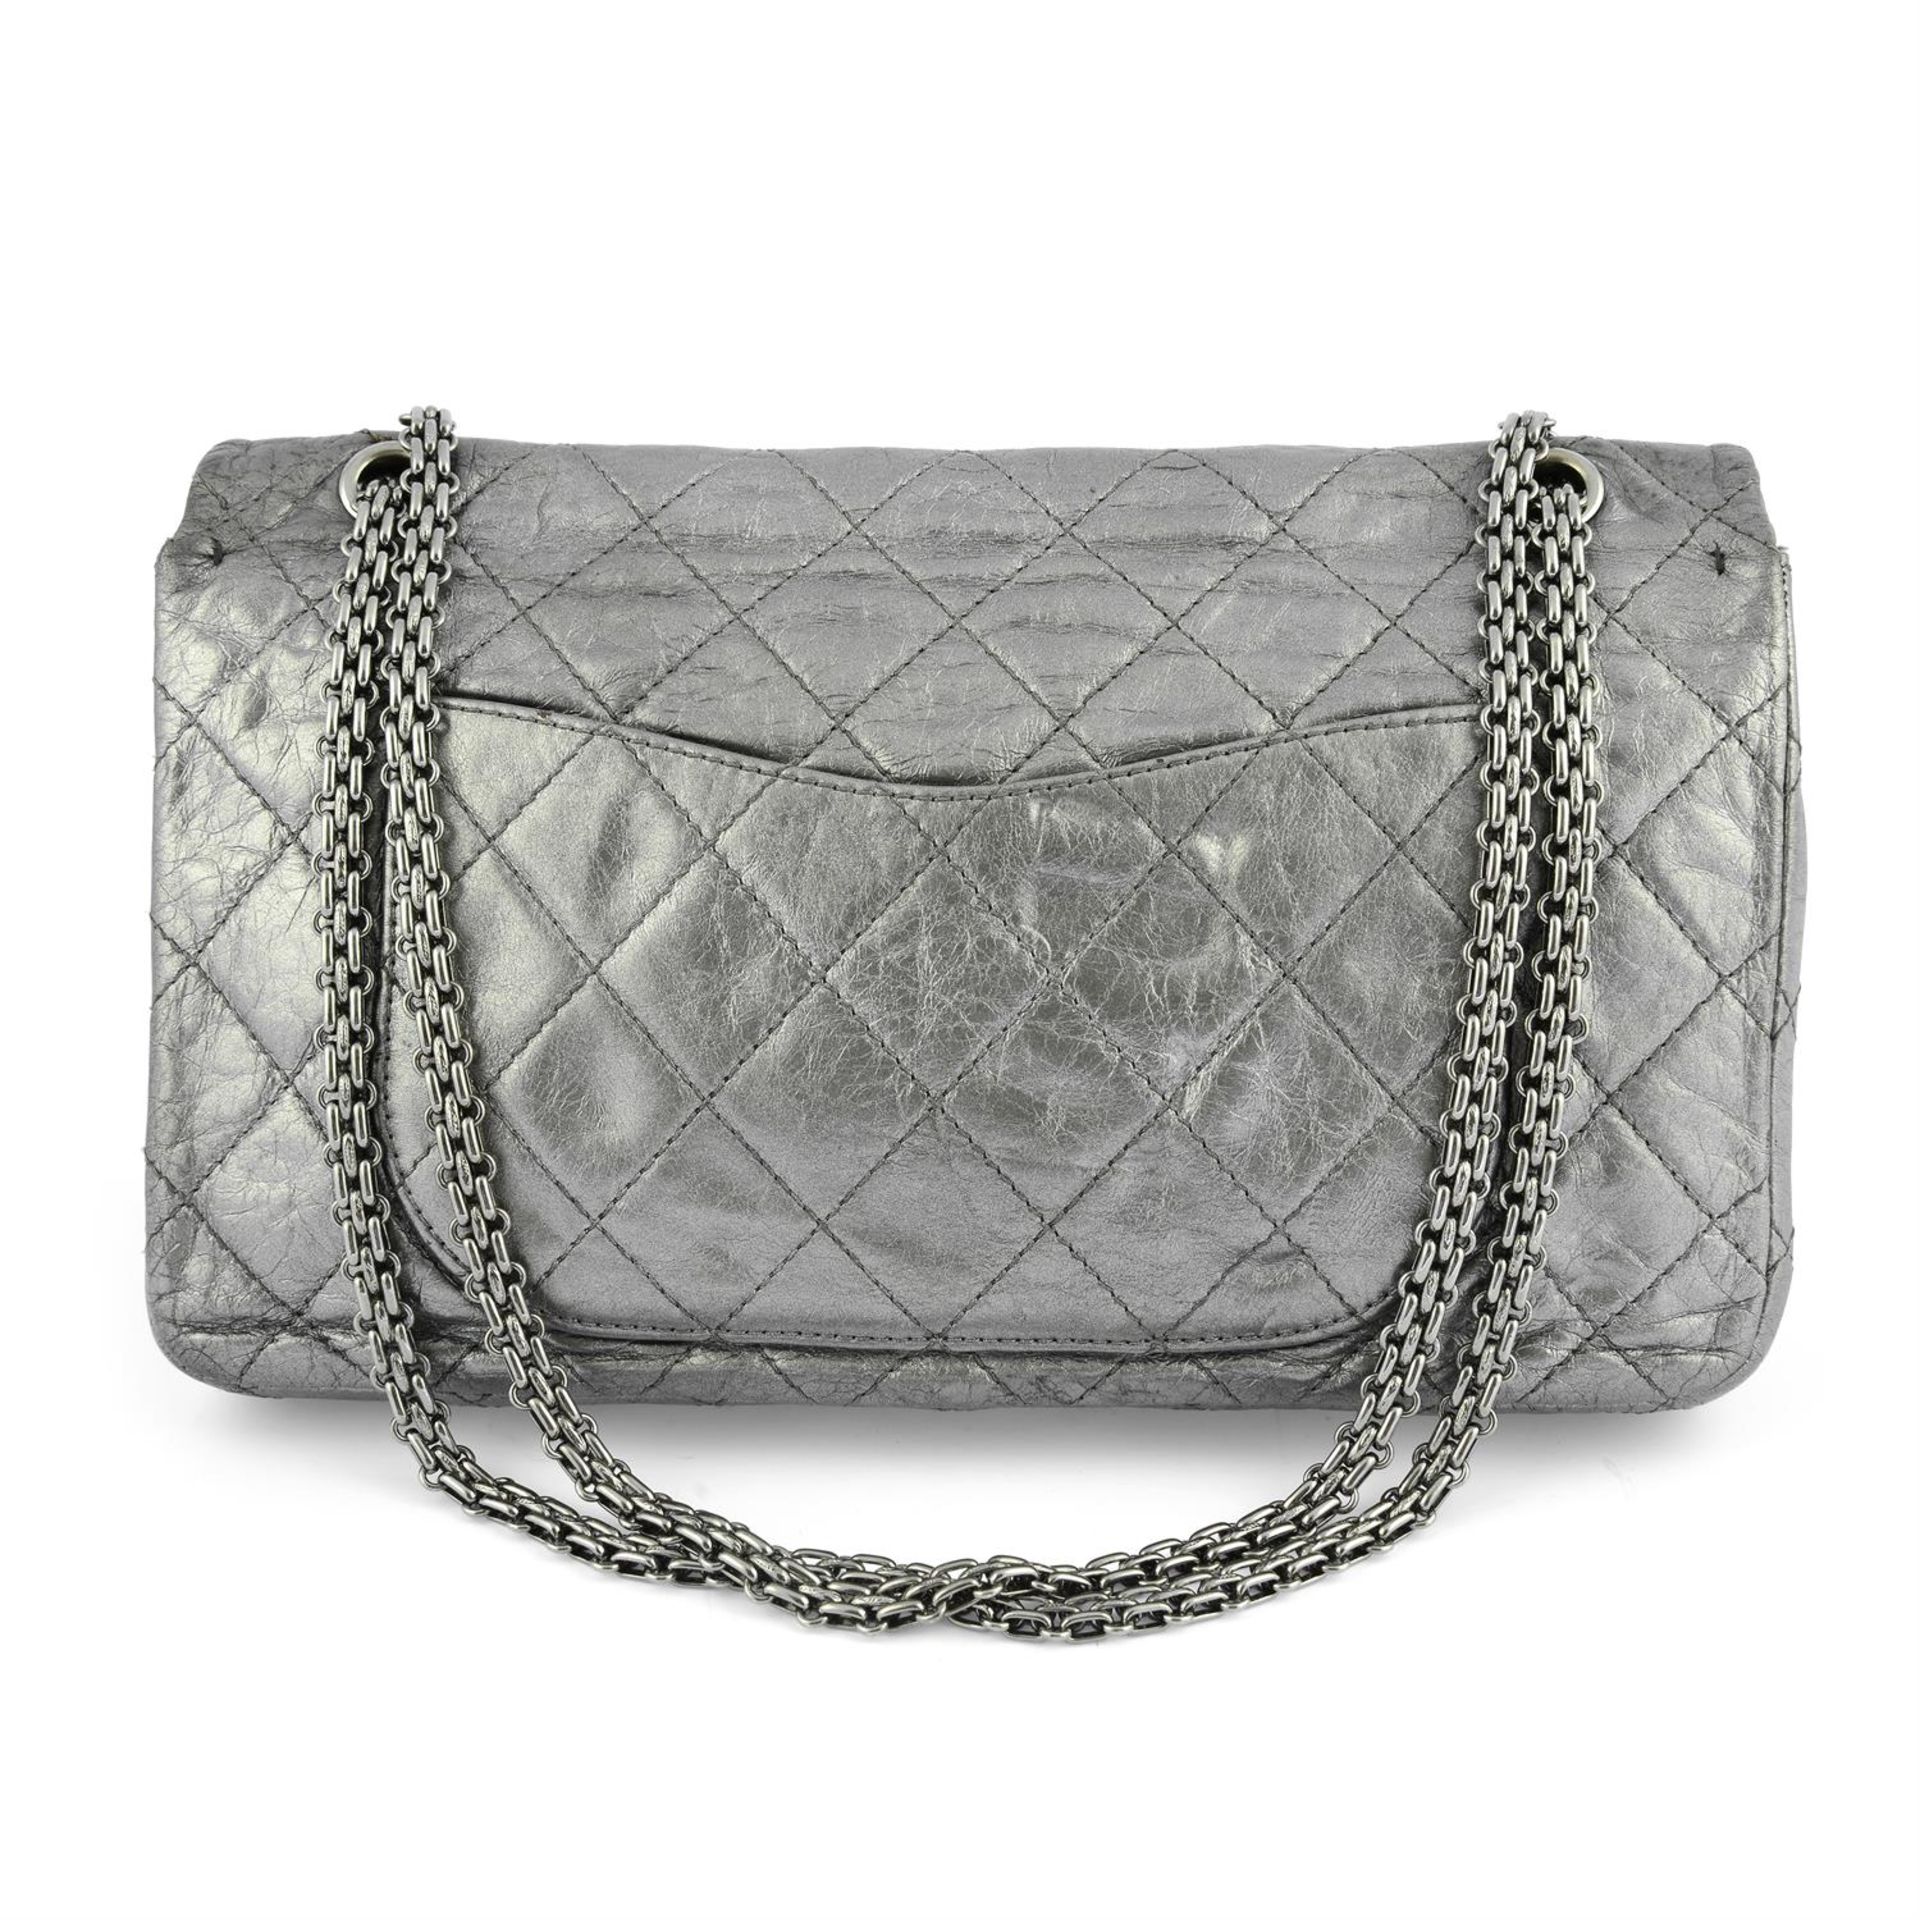 CHANEL - a metallic calfskin Reissue 2.55 double flap bag. - Image 2 of 5